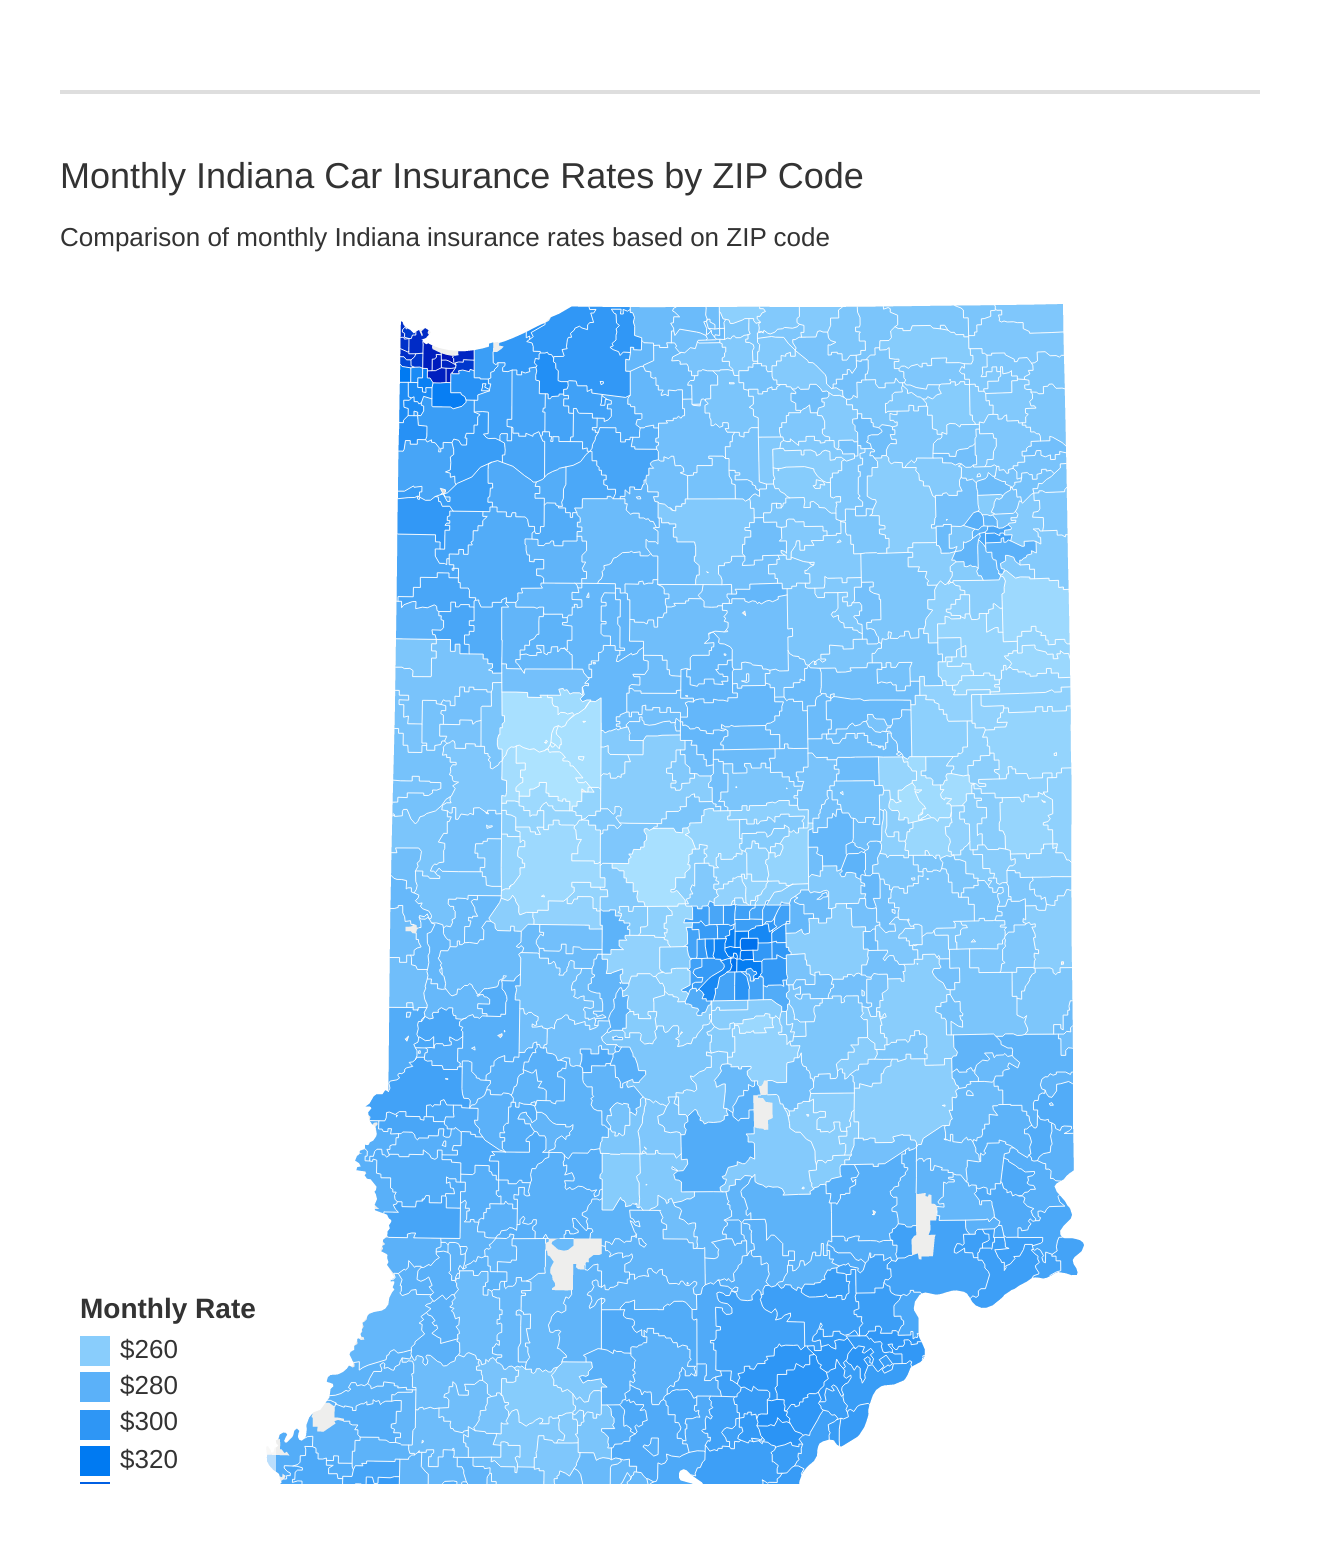 Monthly Indiana Car Insurance Rates by ZIP Code